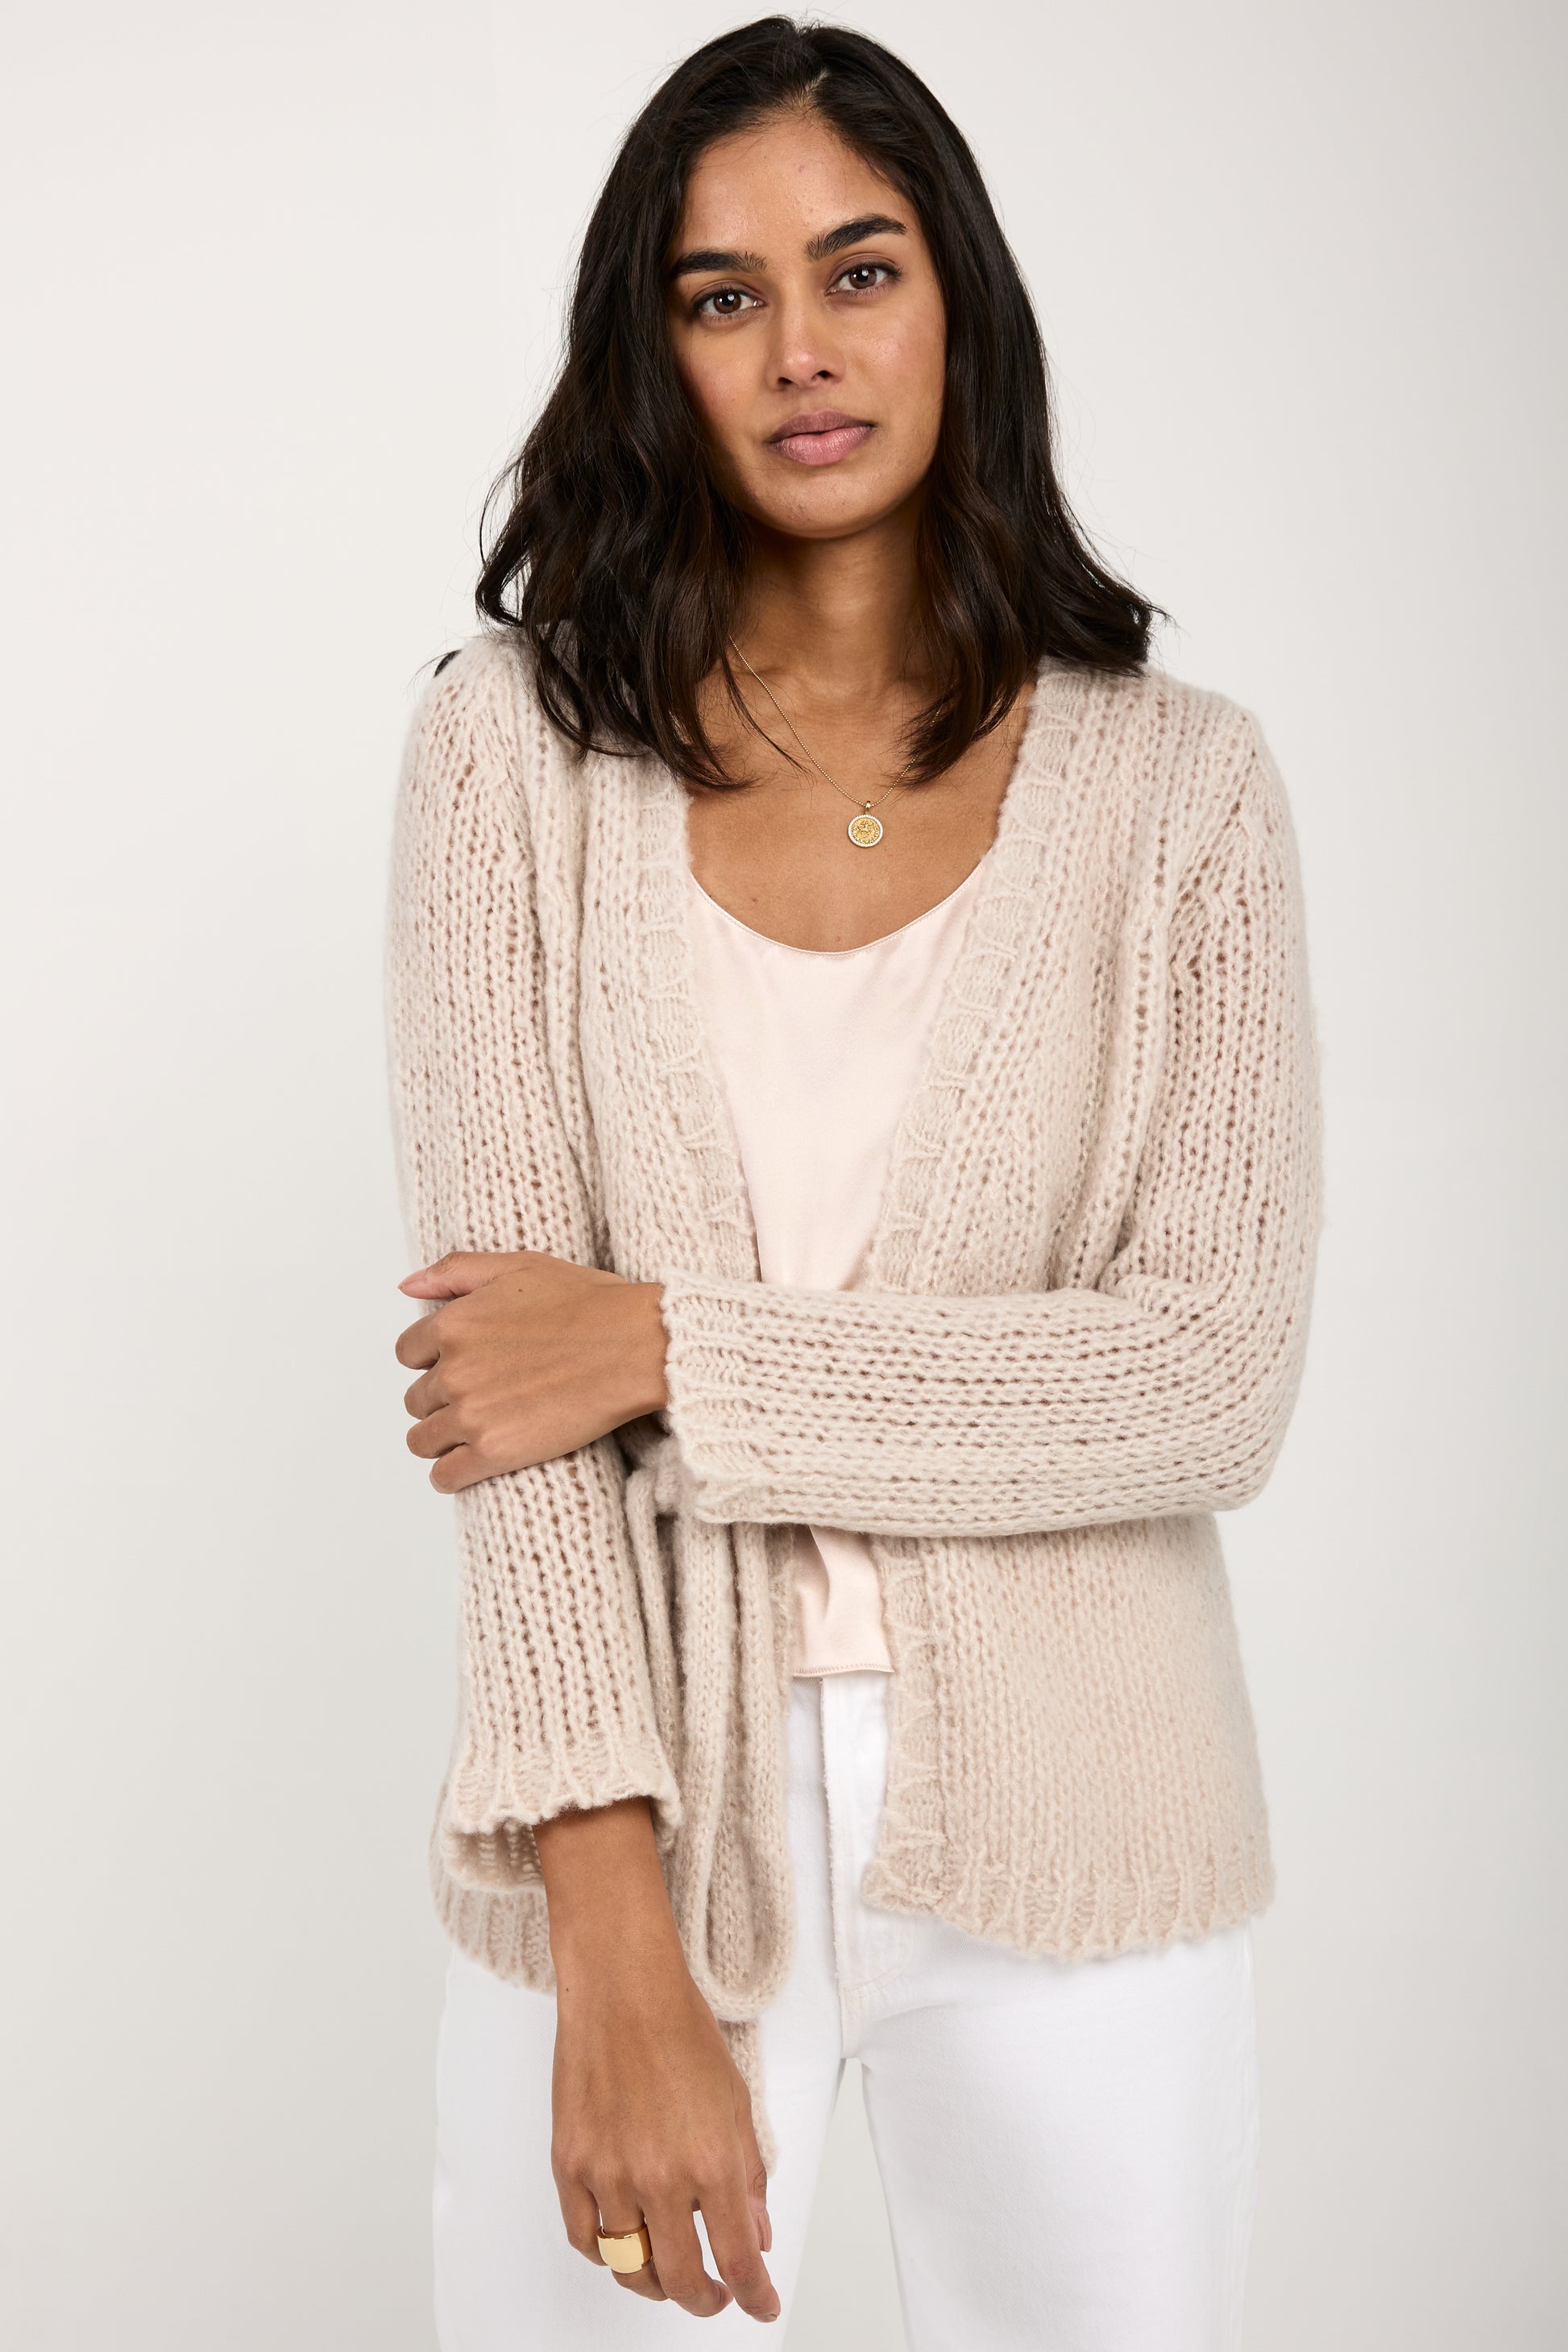 PRIVATE 0204 Super Airy Cashmere Cardigan in Sable